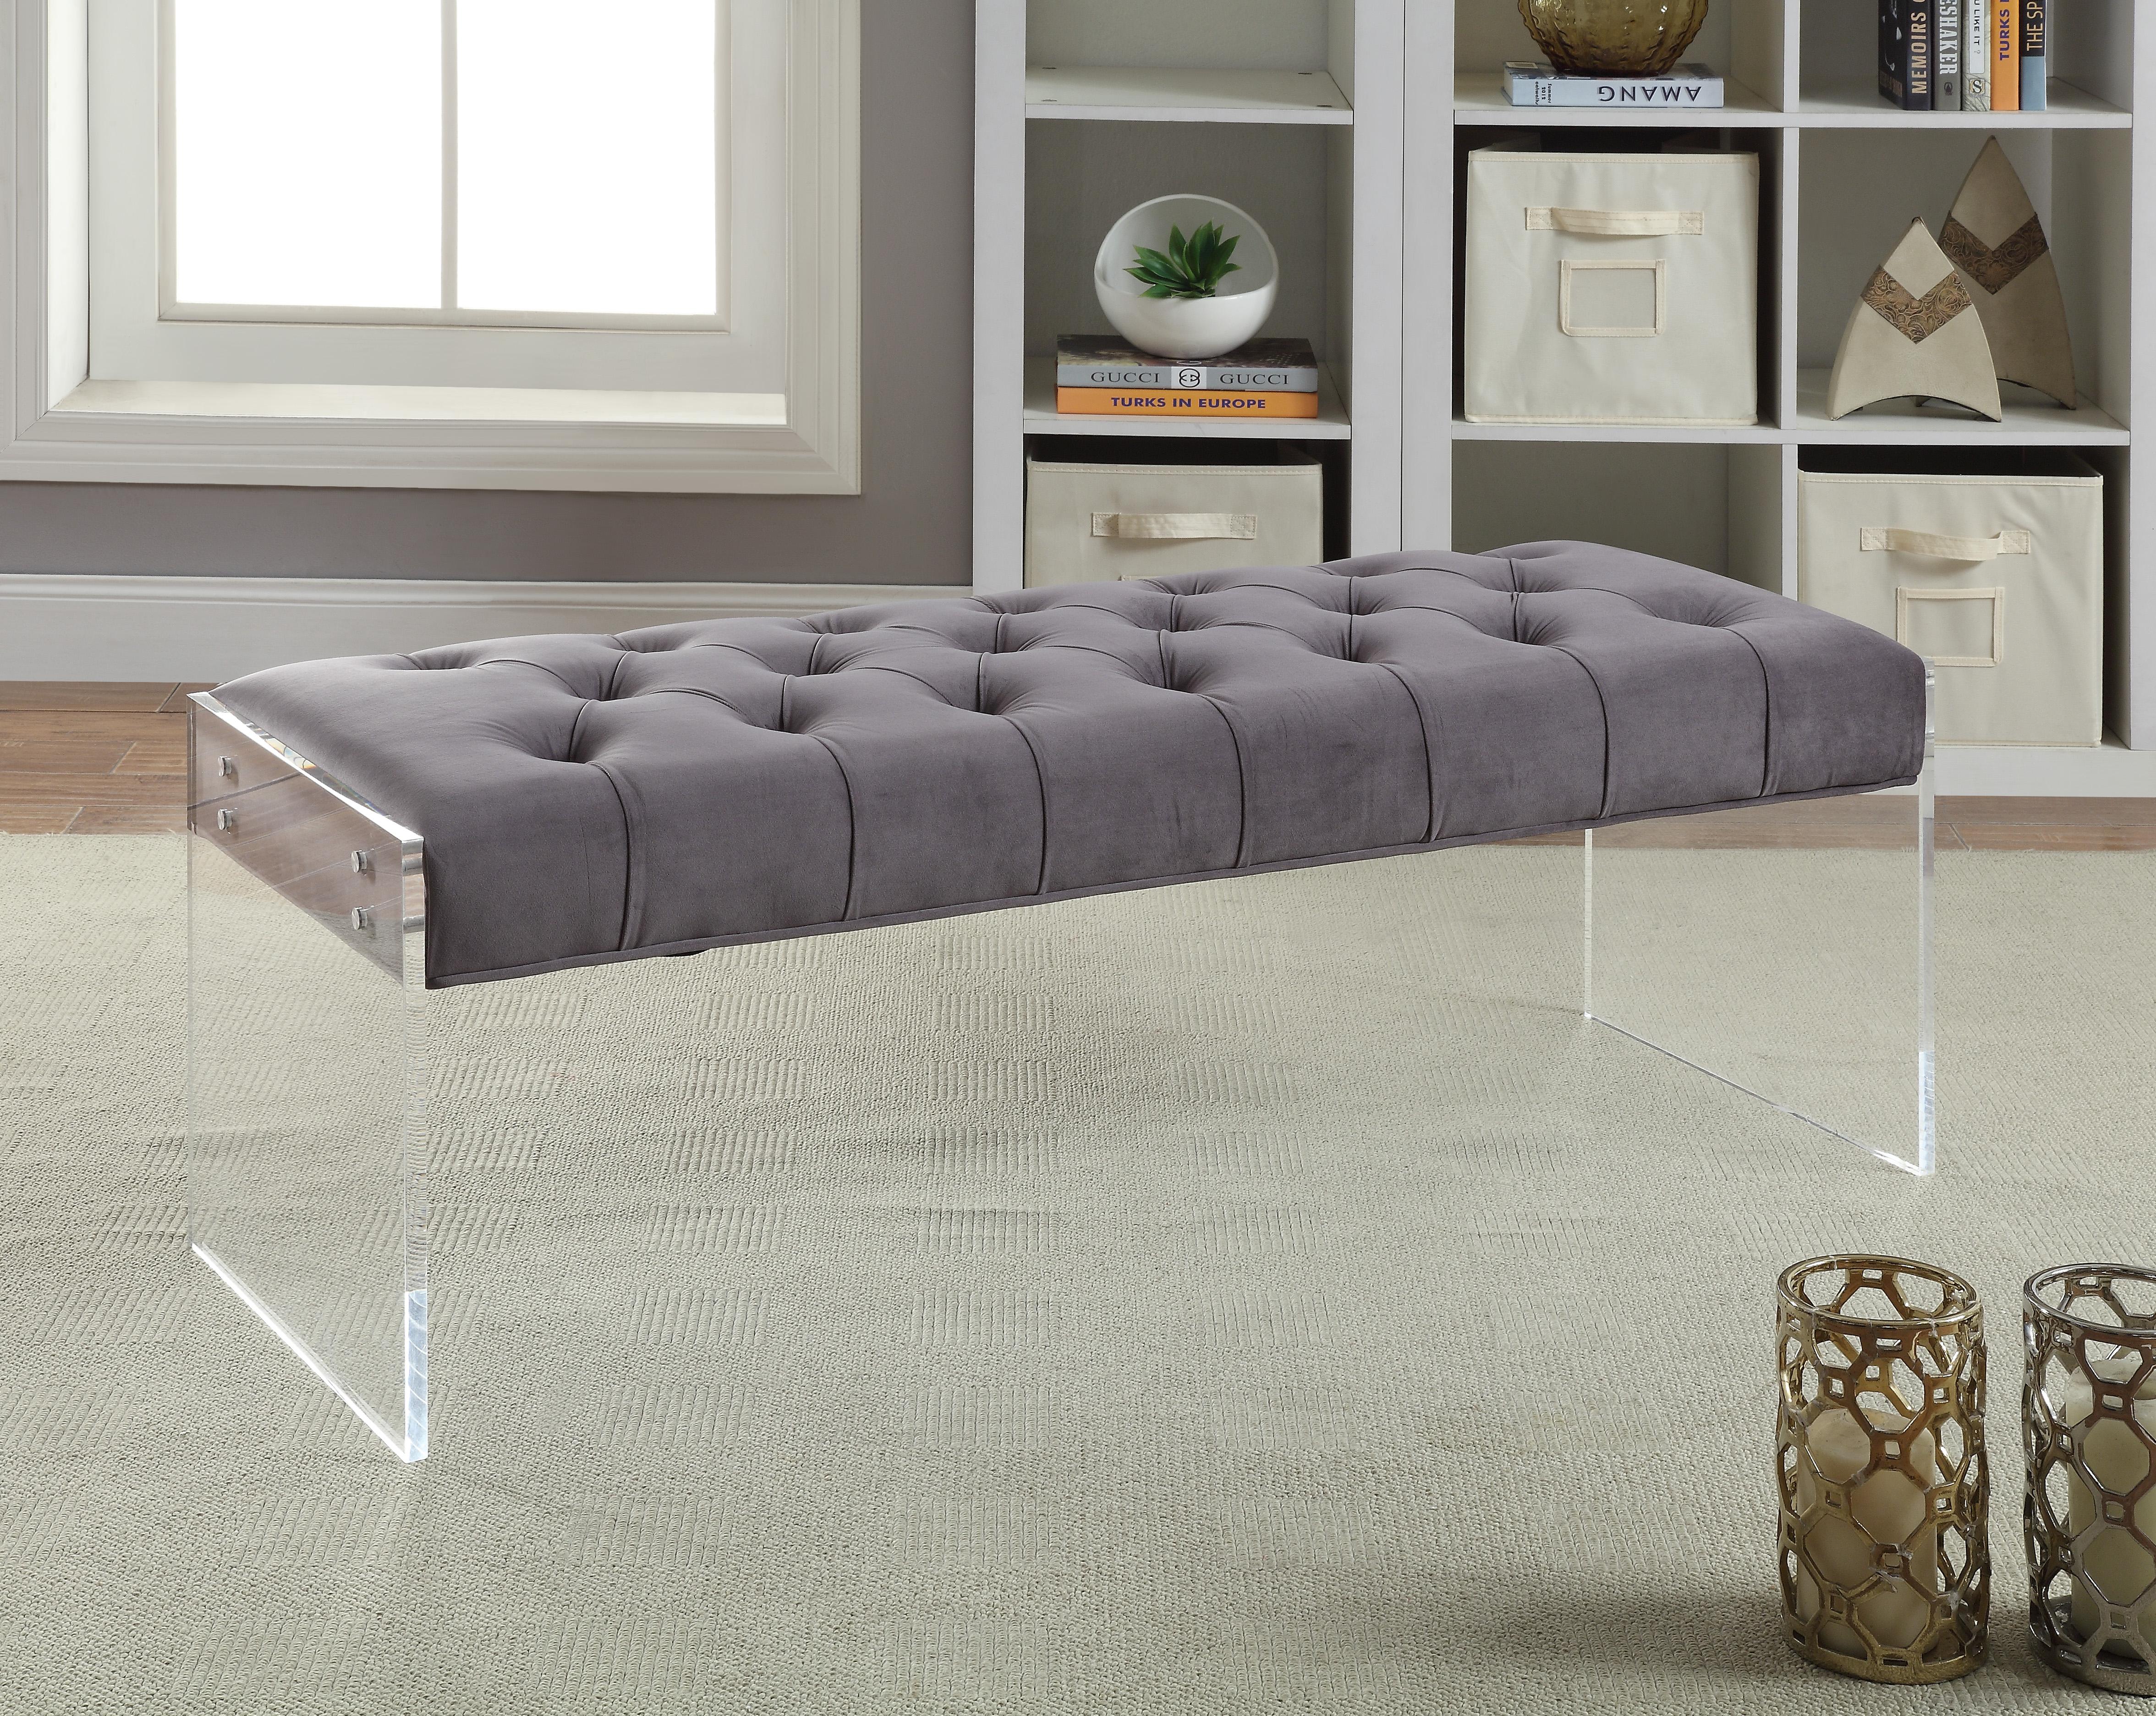 

    
Meridian Furniture 103 Jane Velvet Bench in Grey w/ Acrylic Legs Contemporary Style
